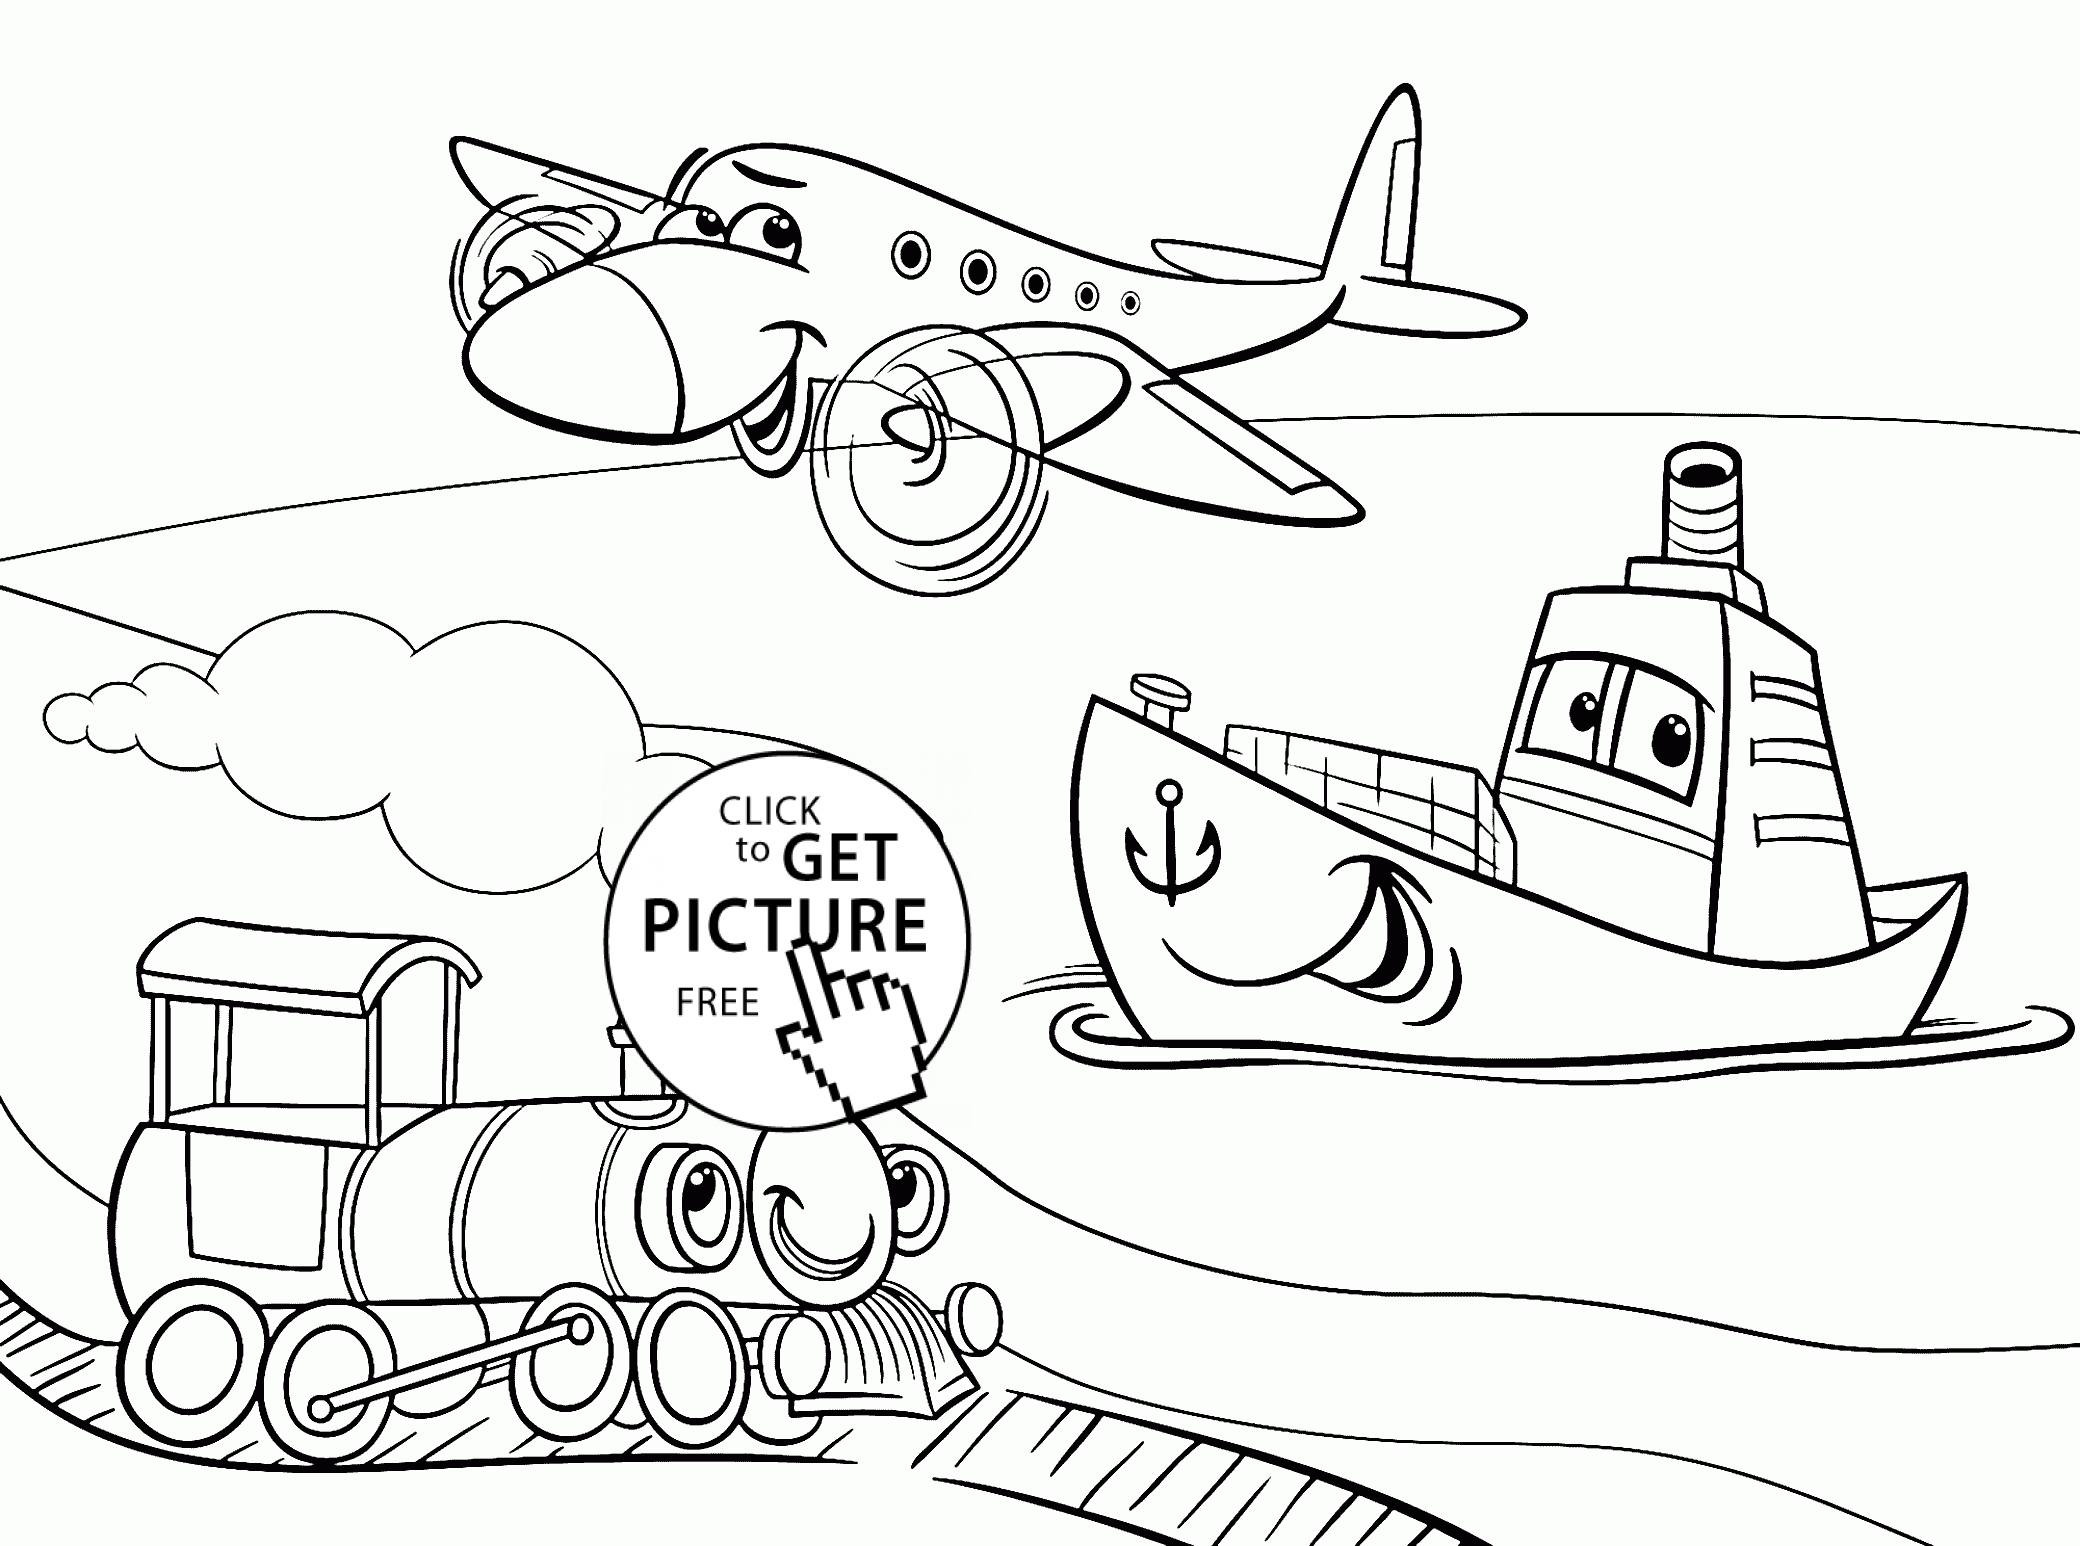 Funny Cartoon Transportation coloring page for kids, coloring ...